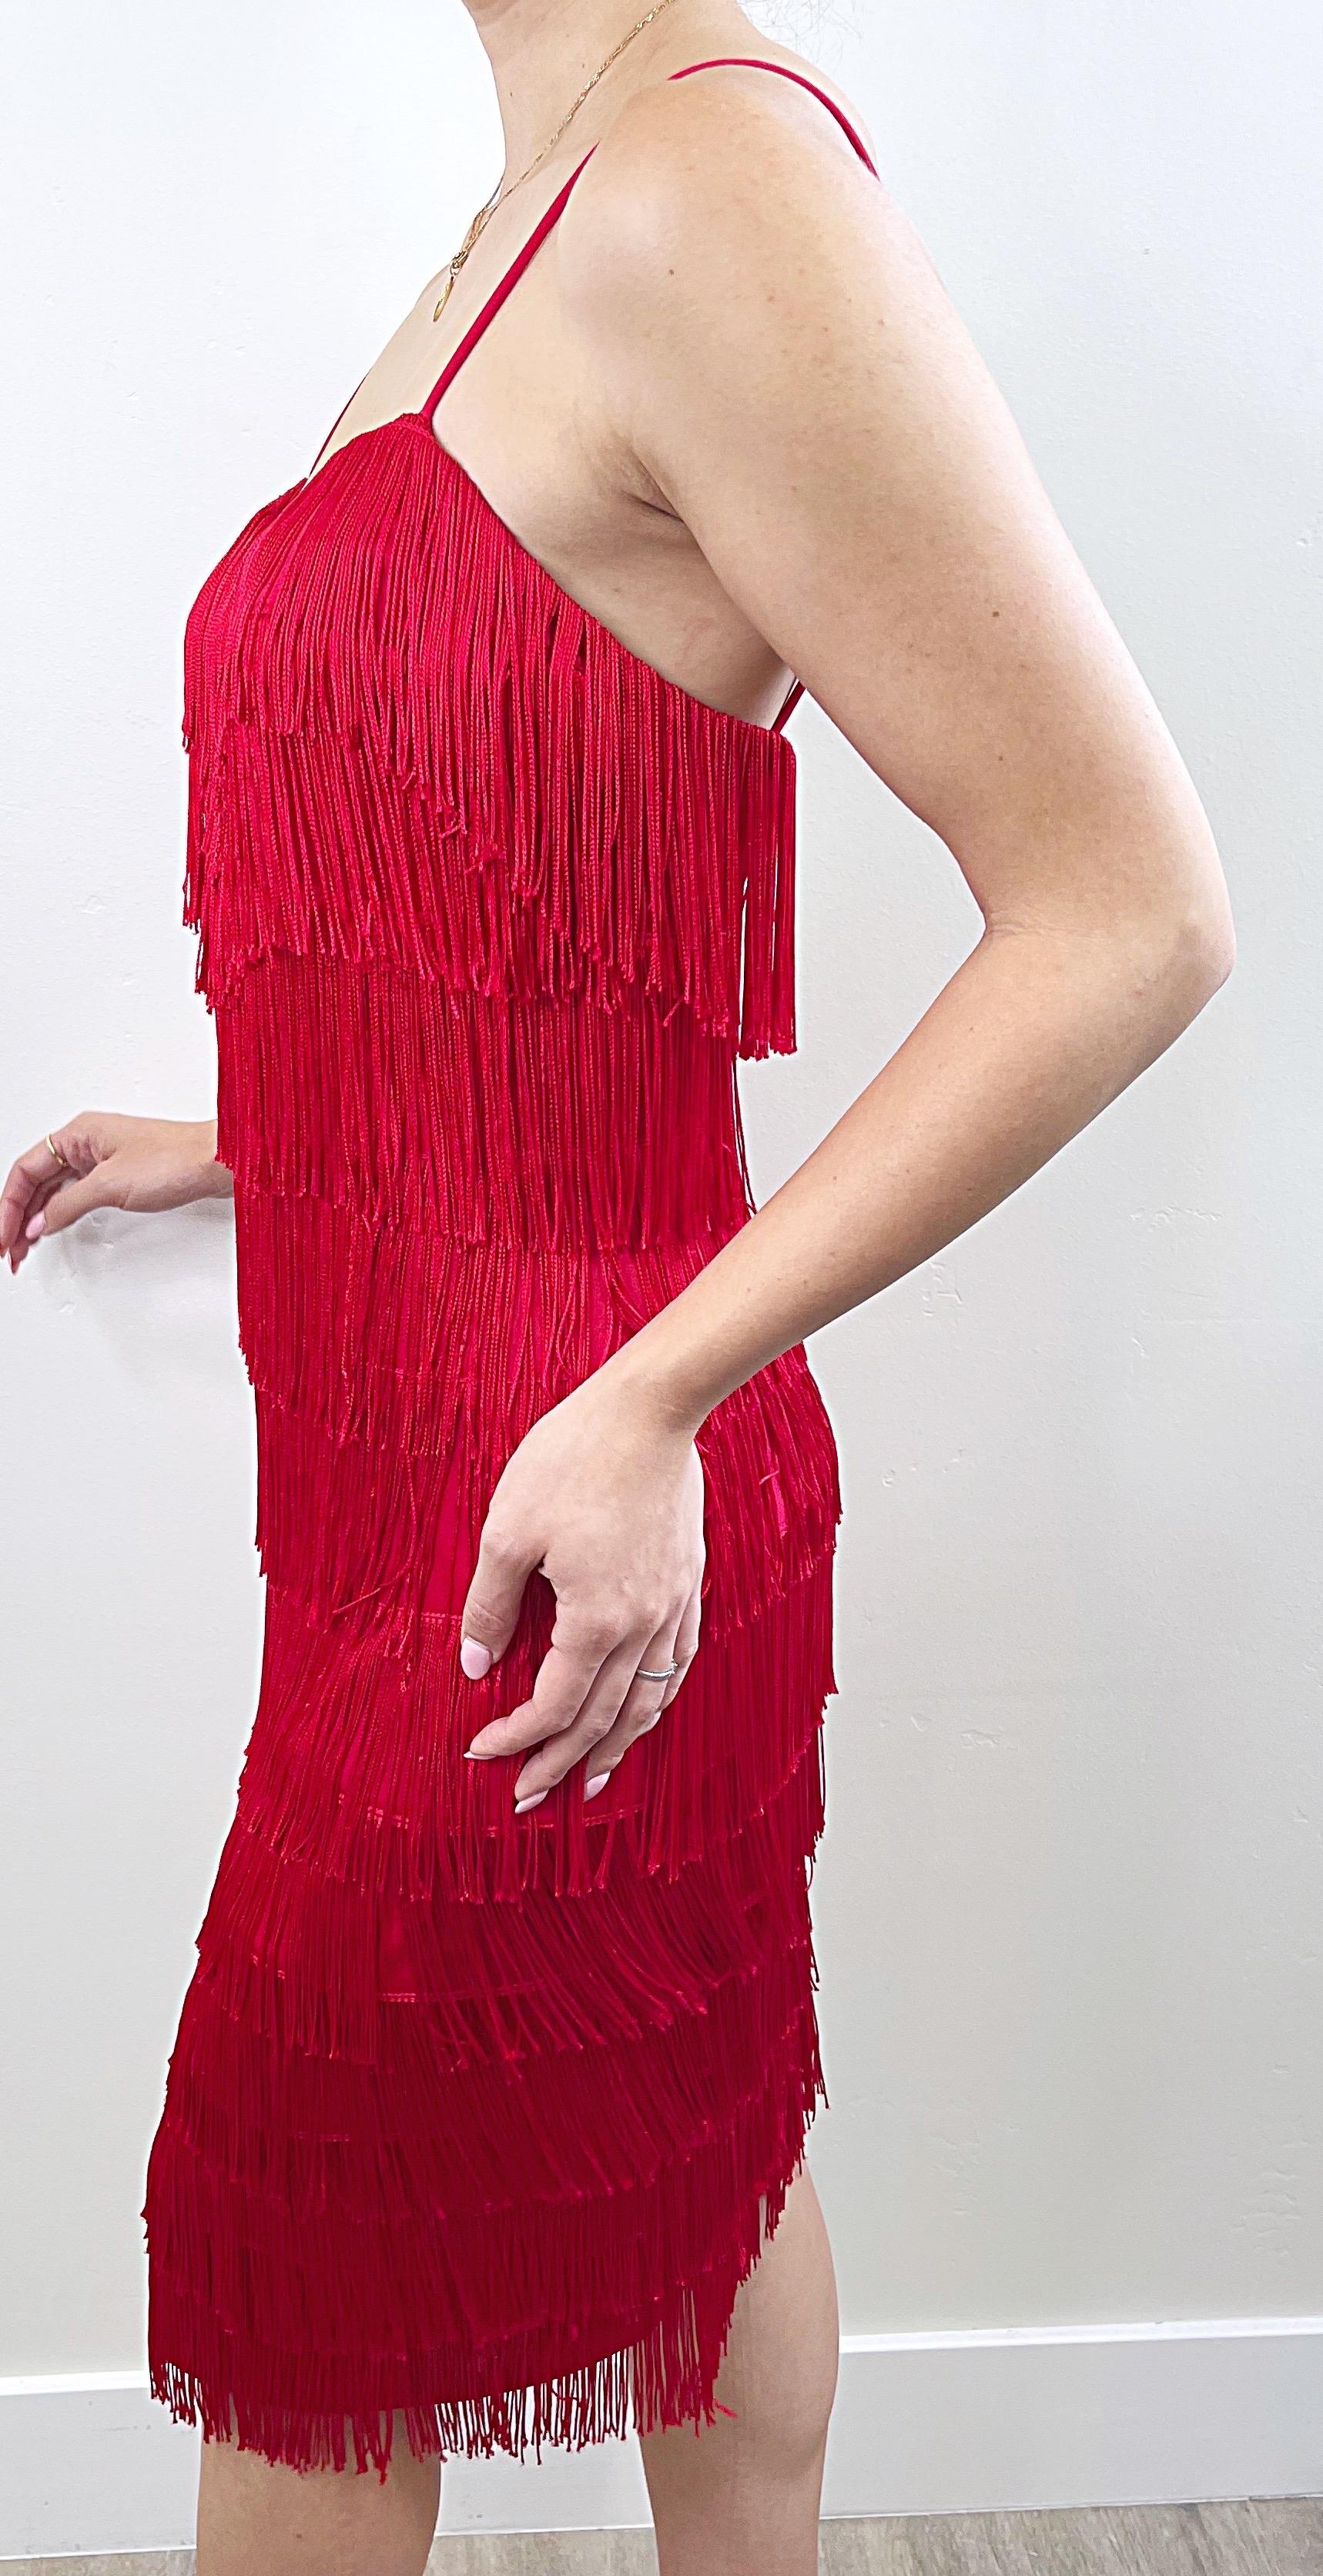 Women's 1980s Does 1920s Lipstick Red Flapper Style Fully Fringed Vintage 80s 20s Dress For Sale